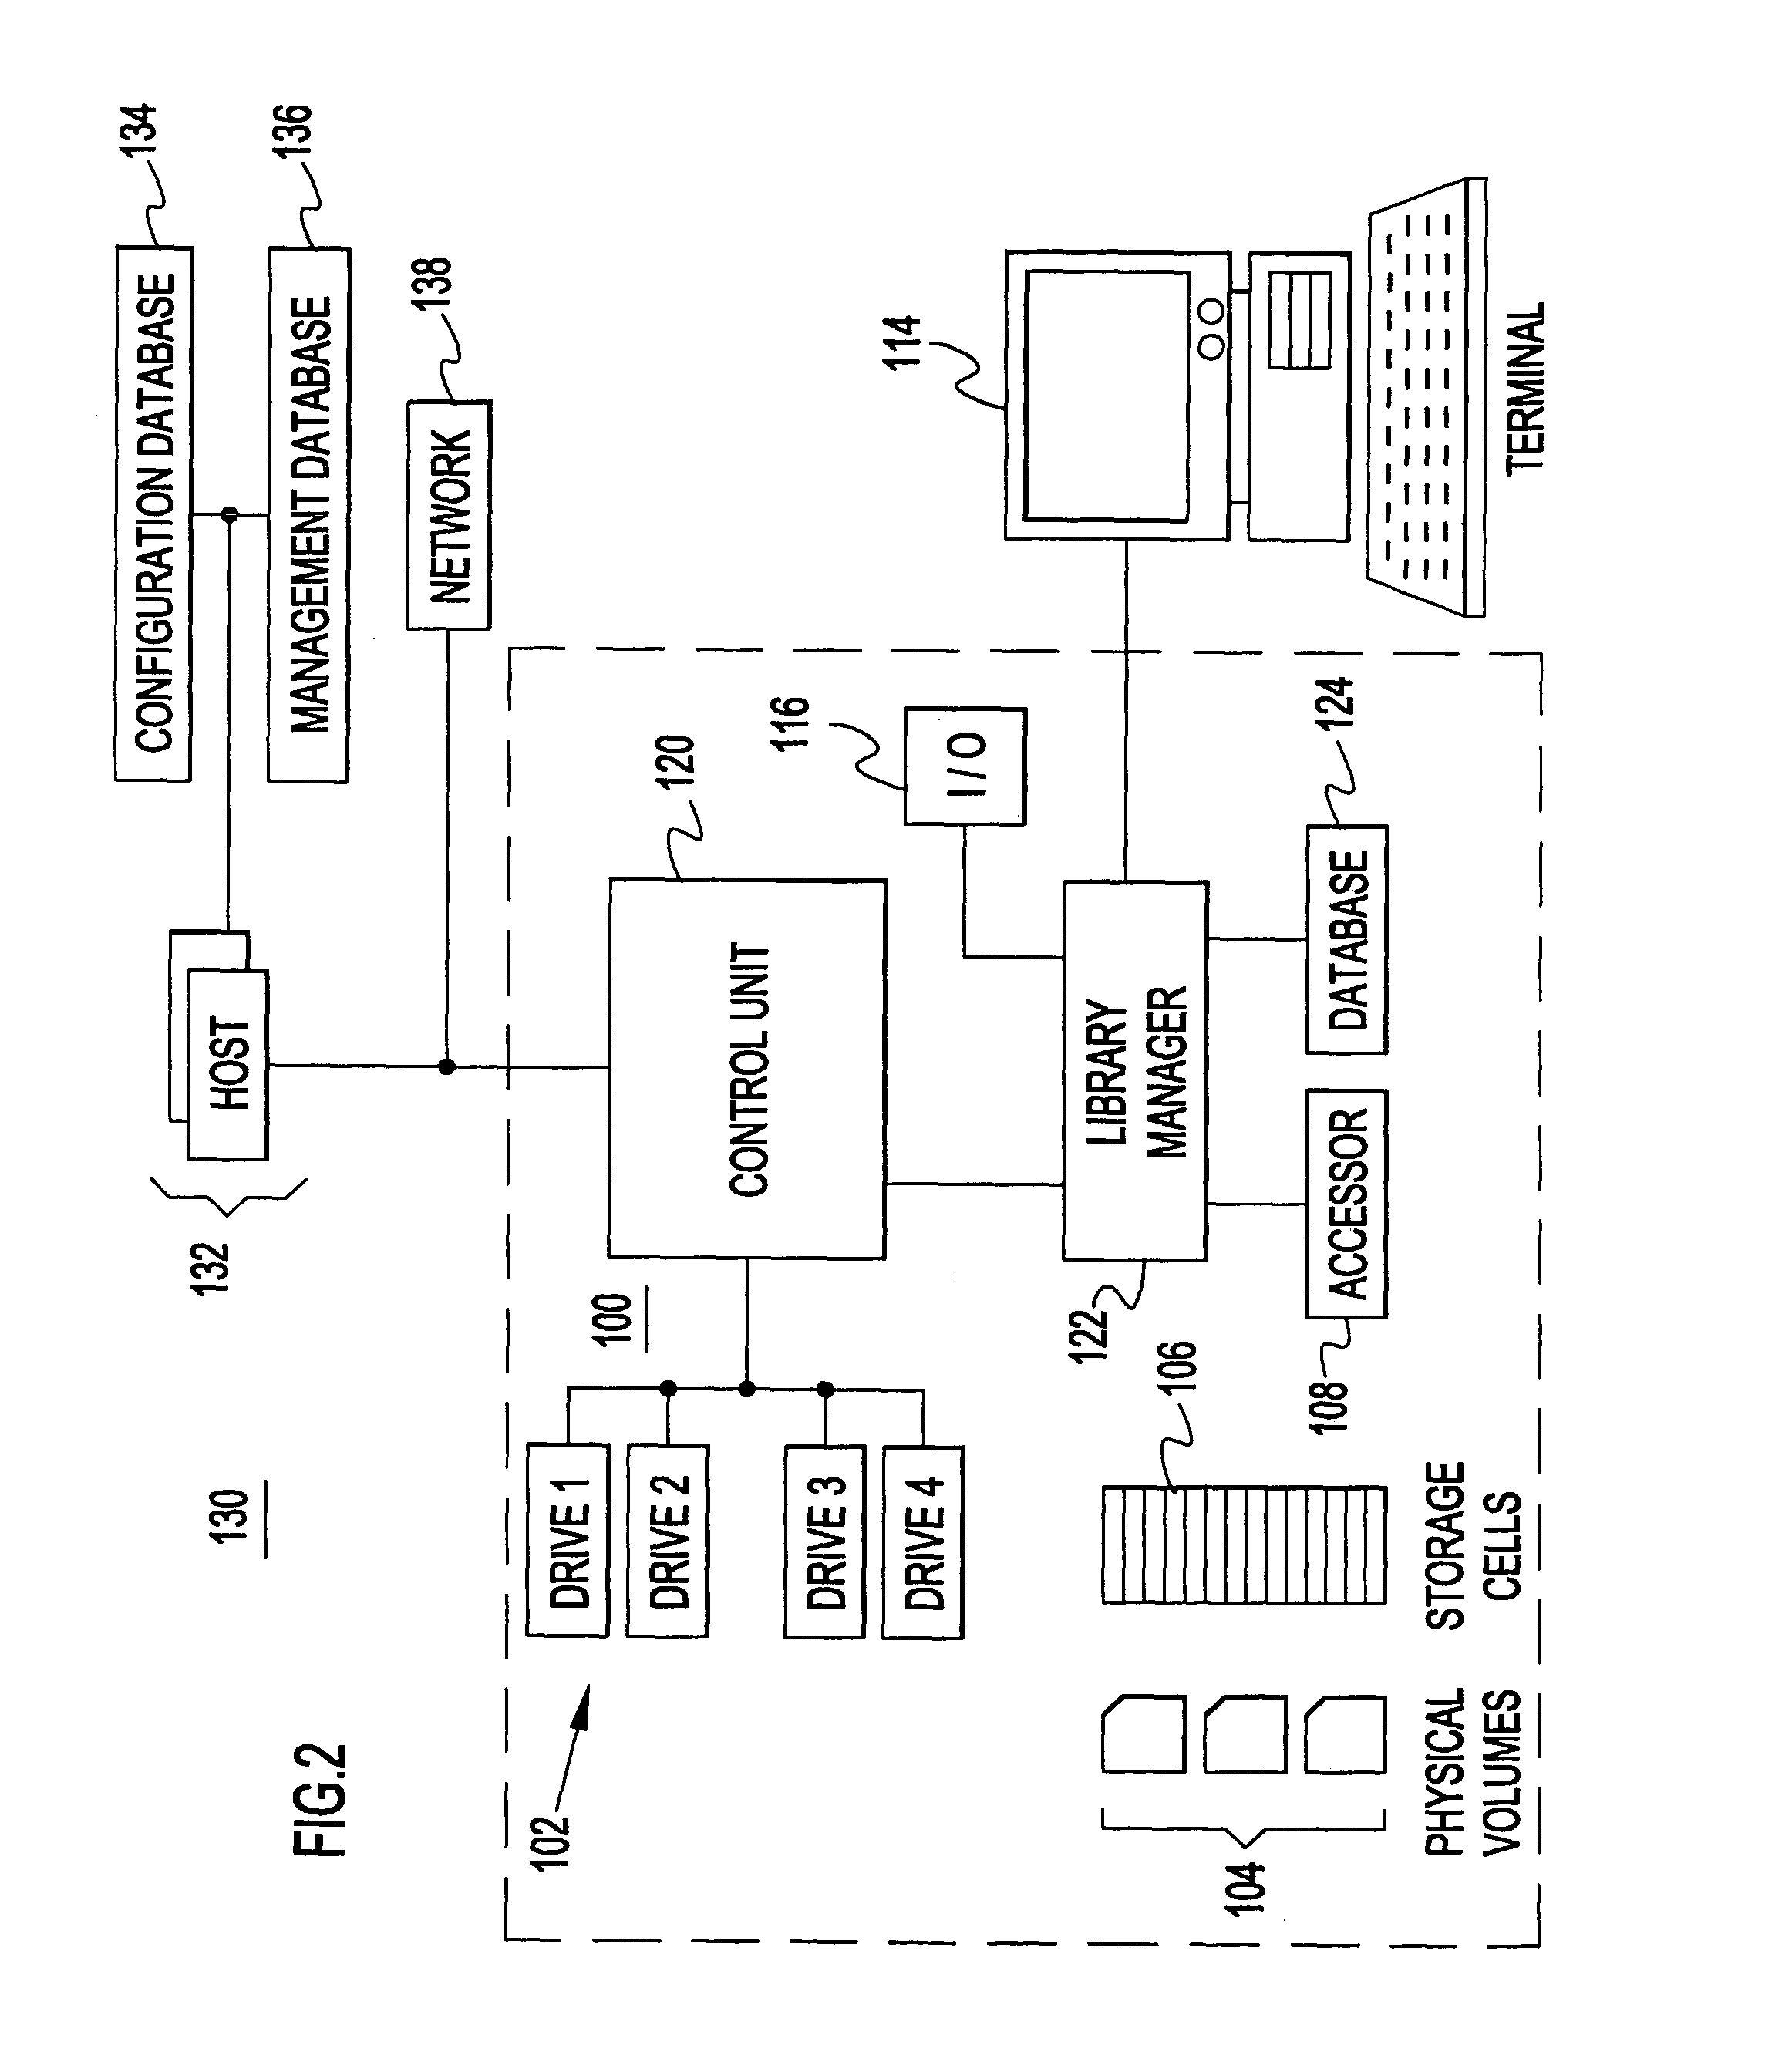 Method for testing media in a library without inserting media into the library database